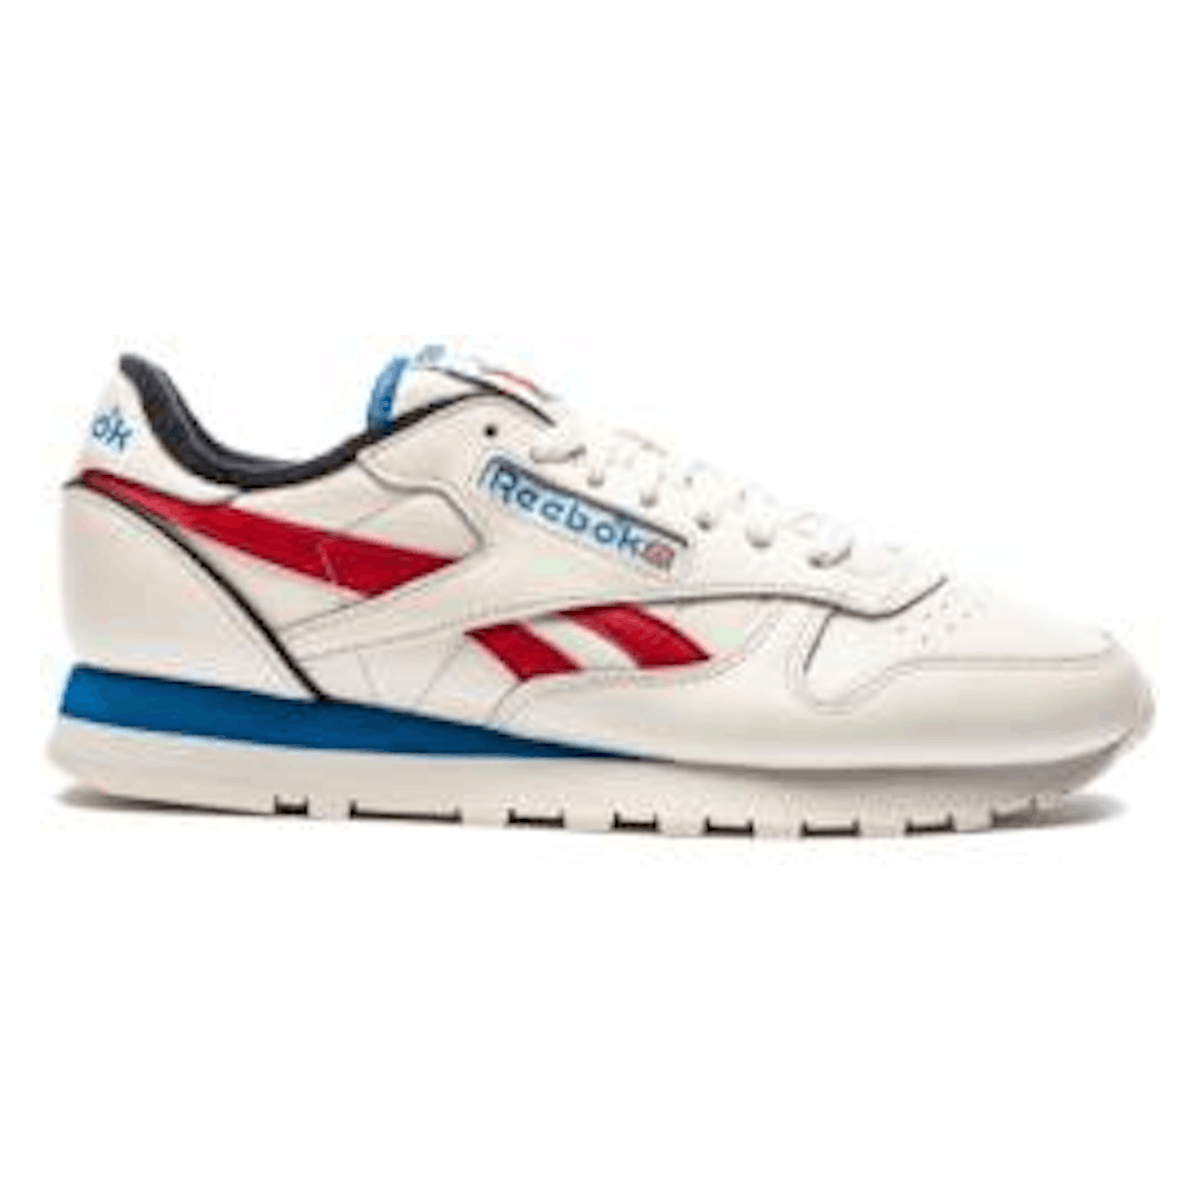 Reebok Classic Leather 1983 Vintage White Blue Red